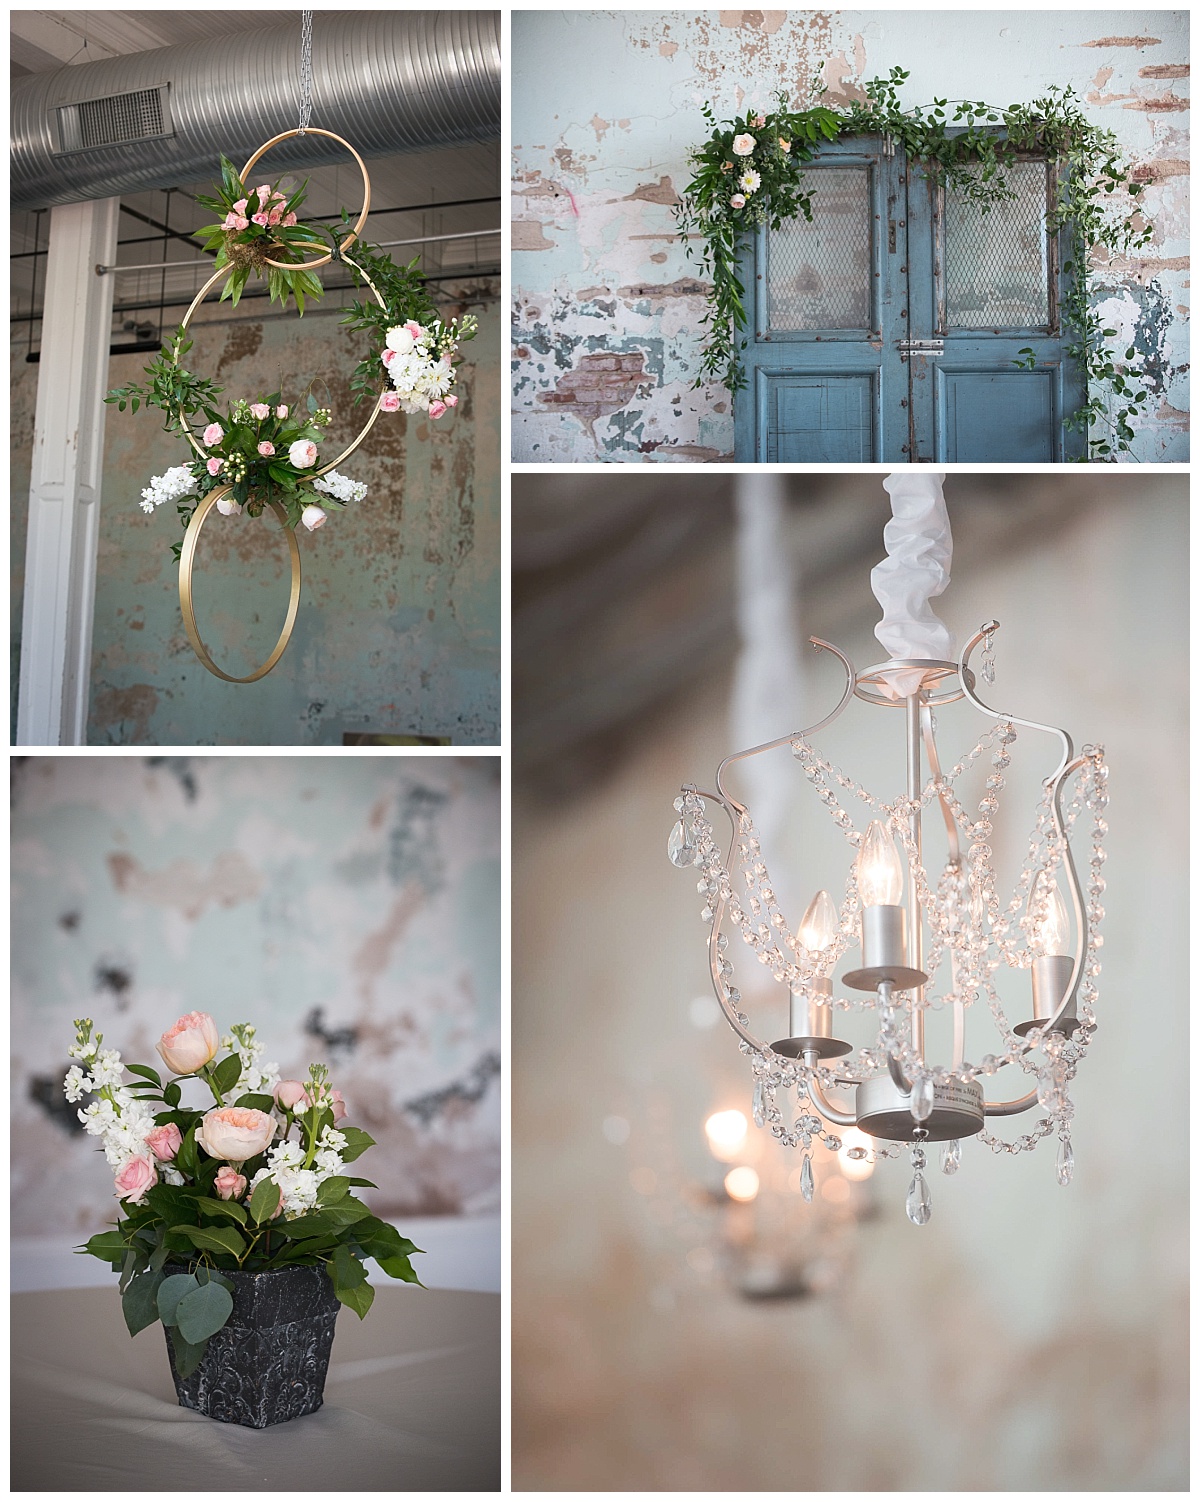 701 Whaley details including crystal chandlier and hanging flowers